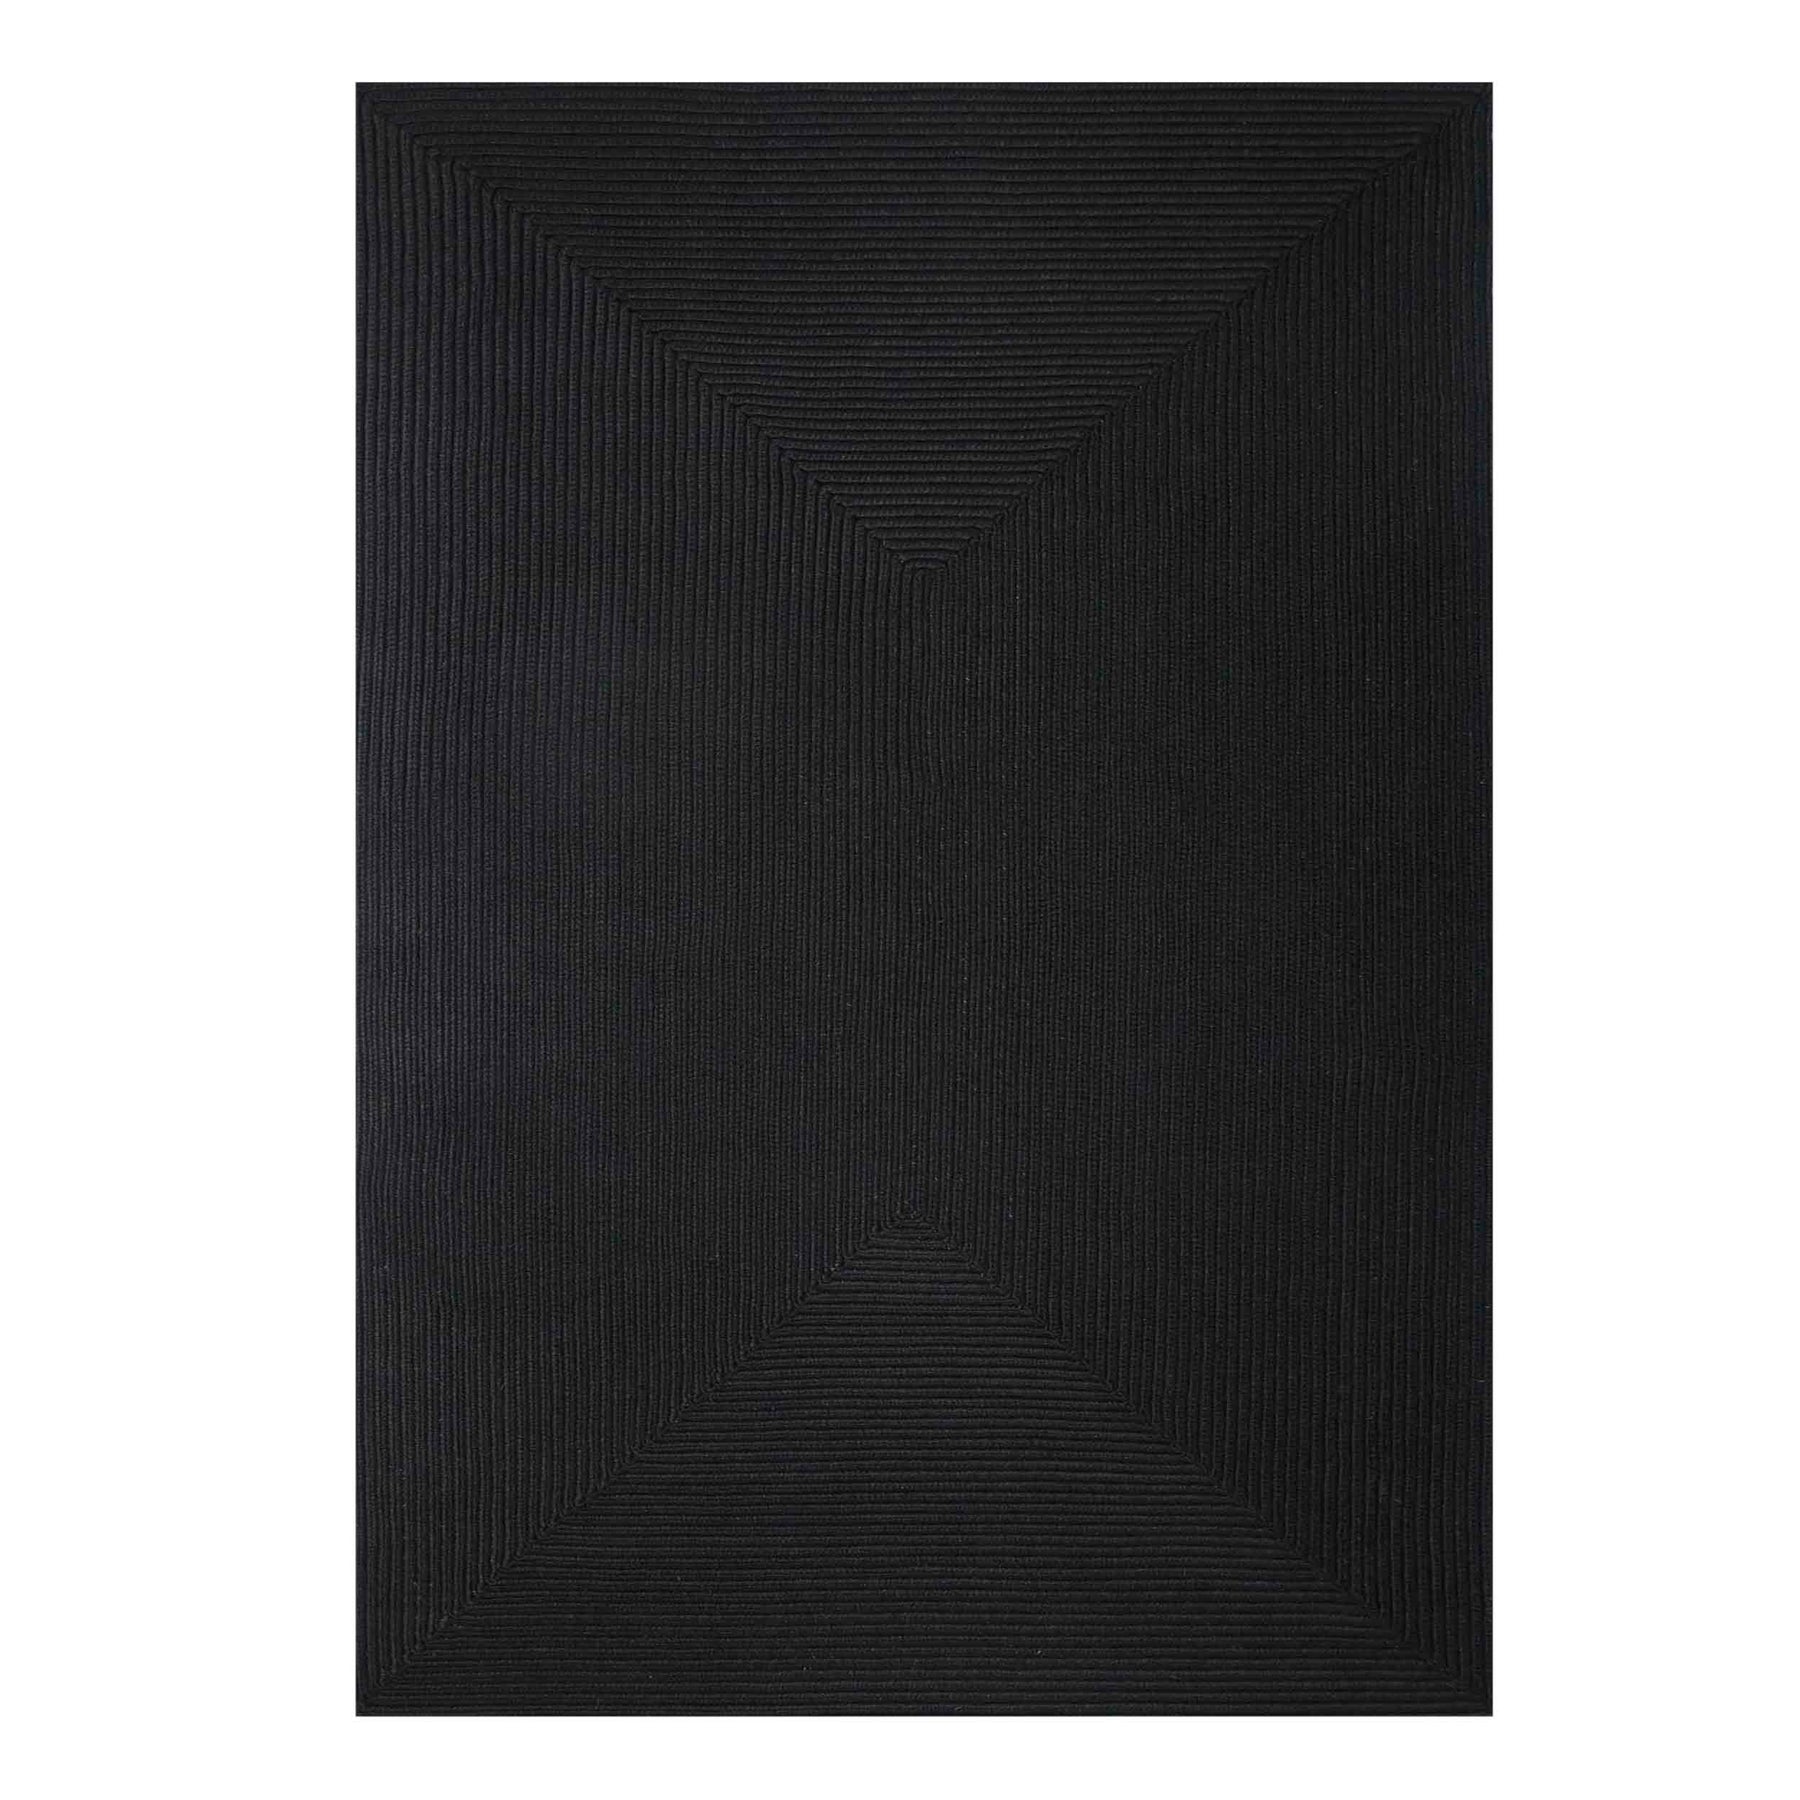 Bohemian Indoor Outdoor Rugs Solid Rectangle Braided Area Rug - Black